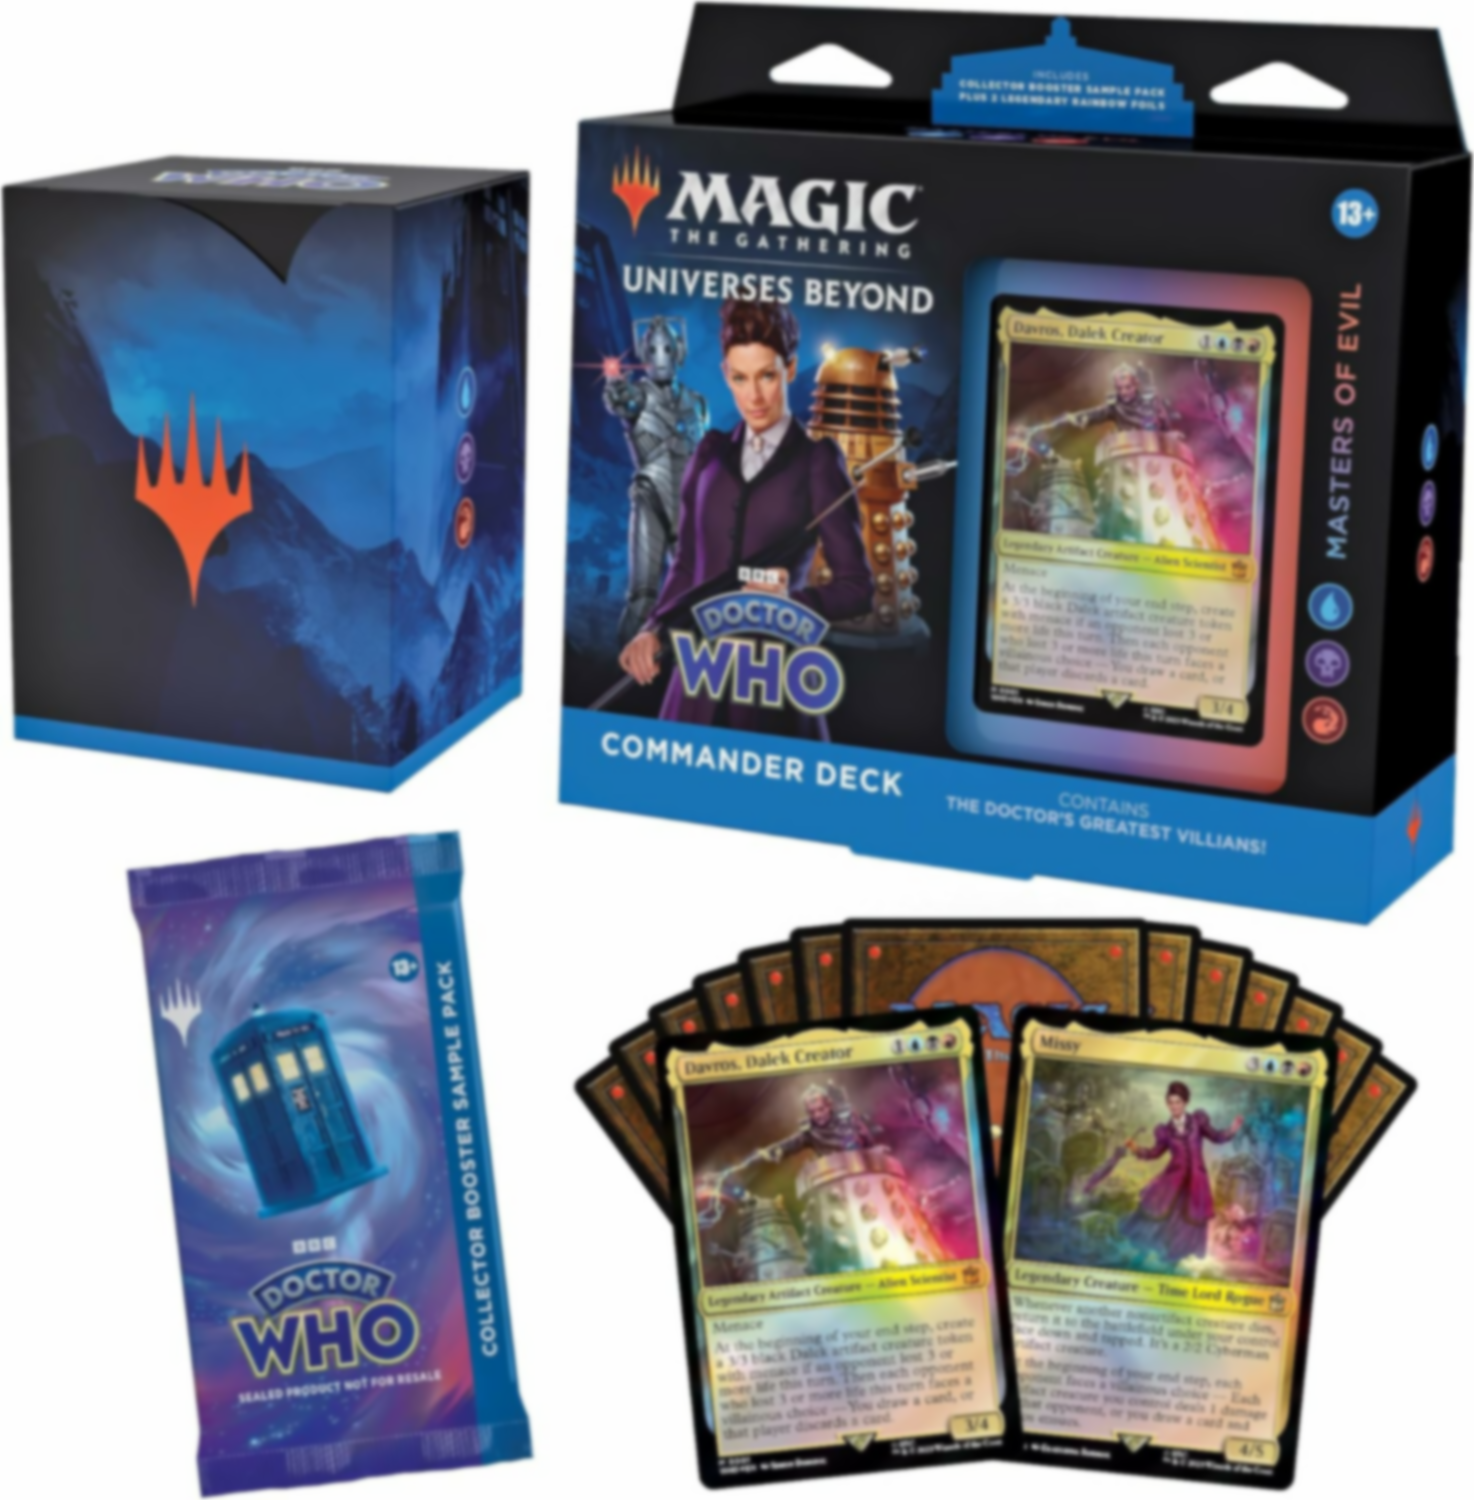 Magic: The Gathering Doctor Who Commander Deck - Masters of Evil components